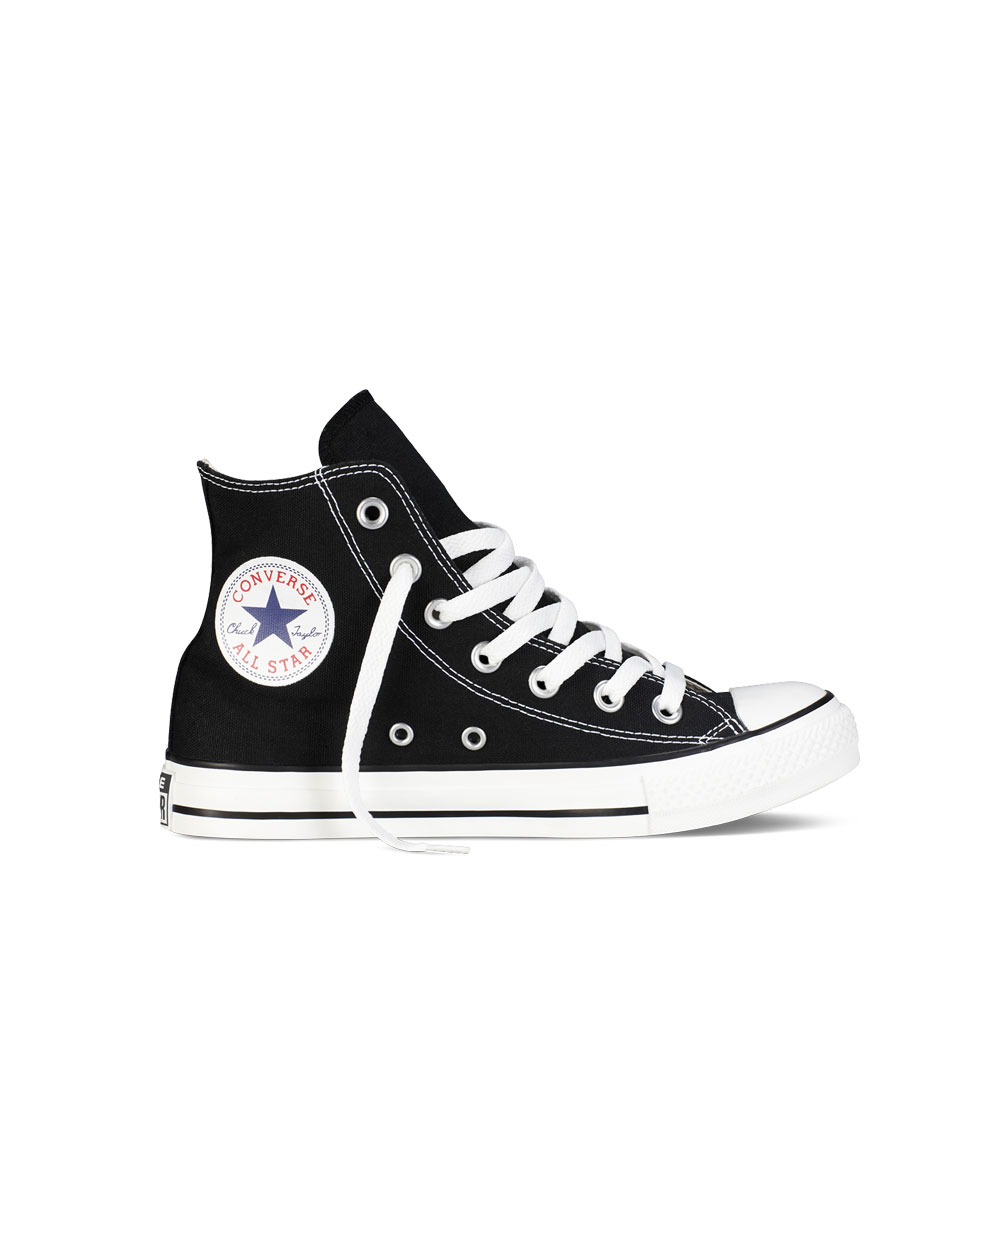 Converse Chuck Taylors from Platypus